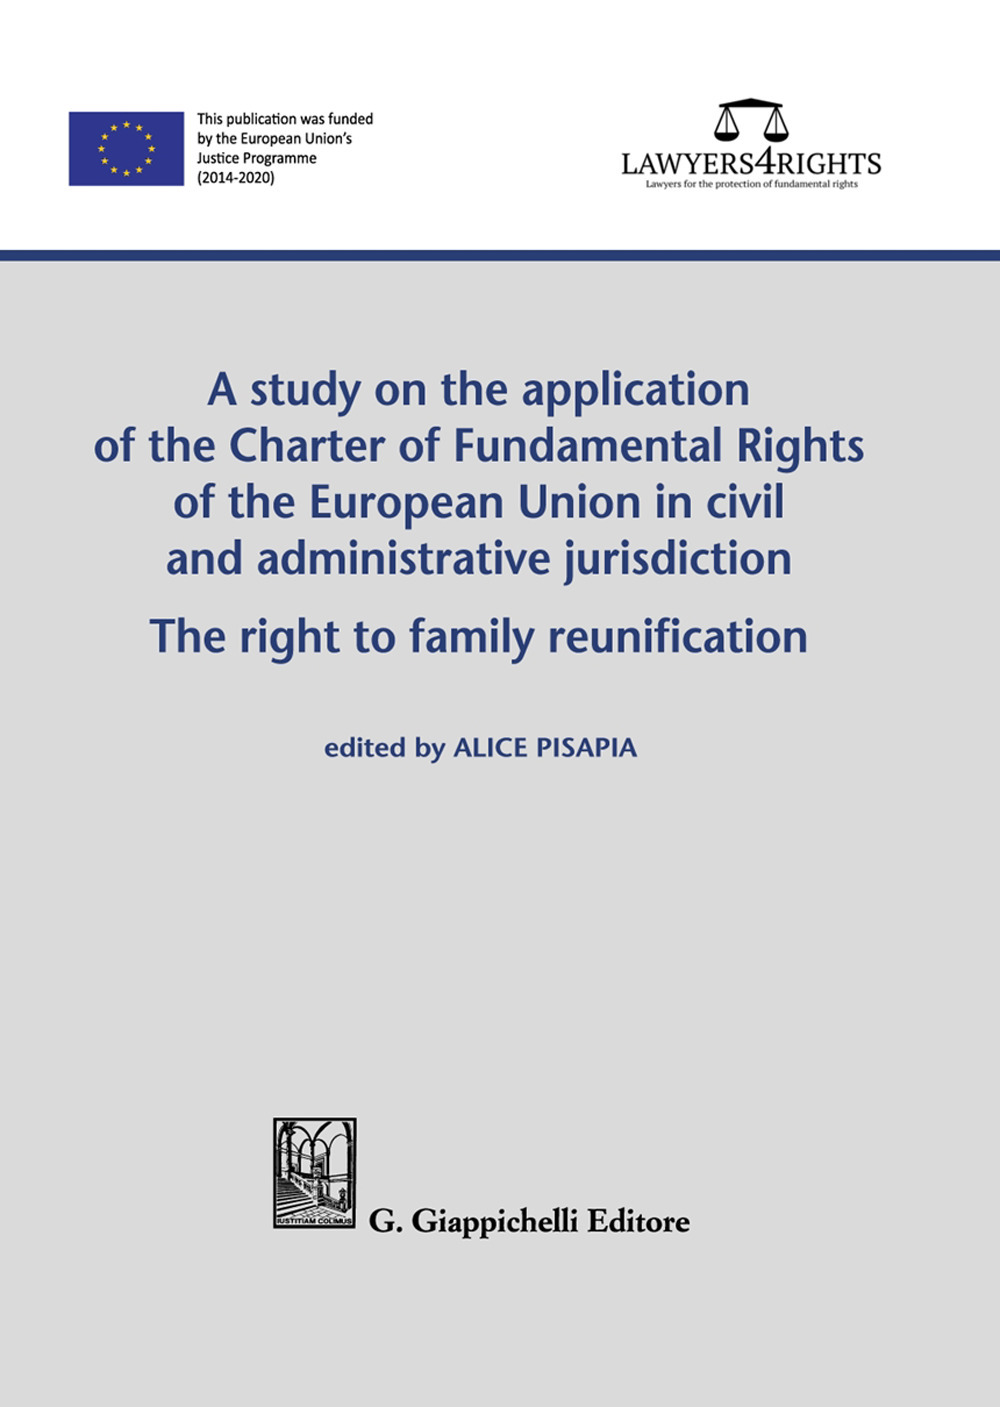 A study on the application of the Charter of Fundamental Rights of European Union in civil and administrative jurisdiction. The right of family reunification